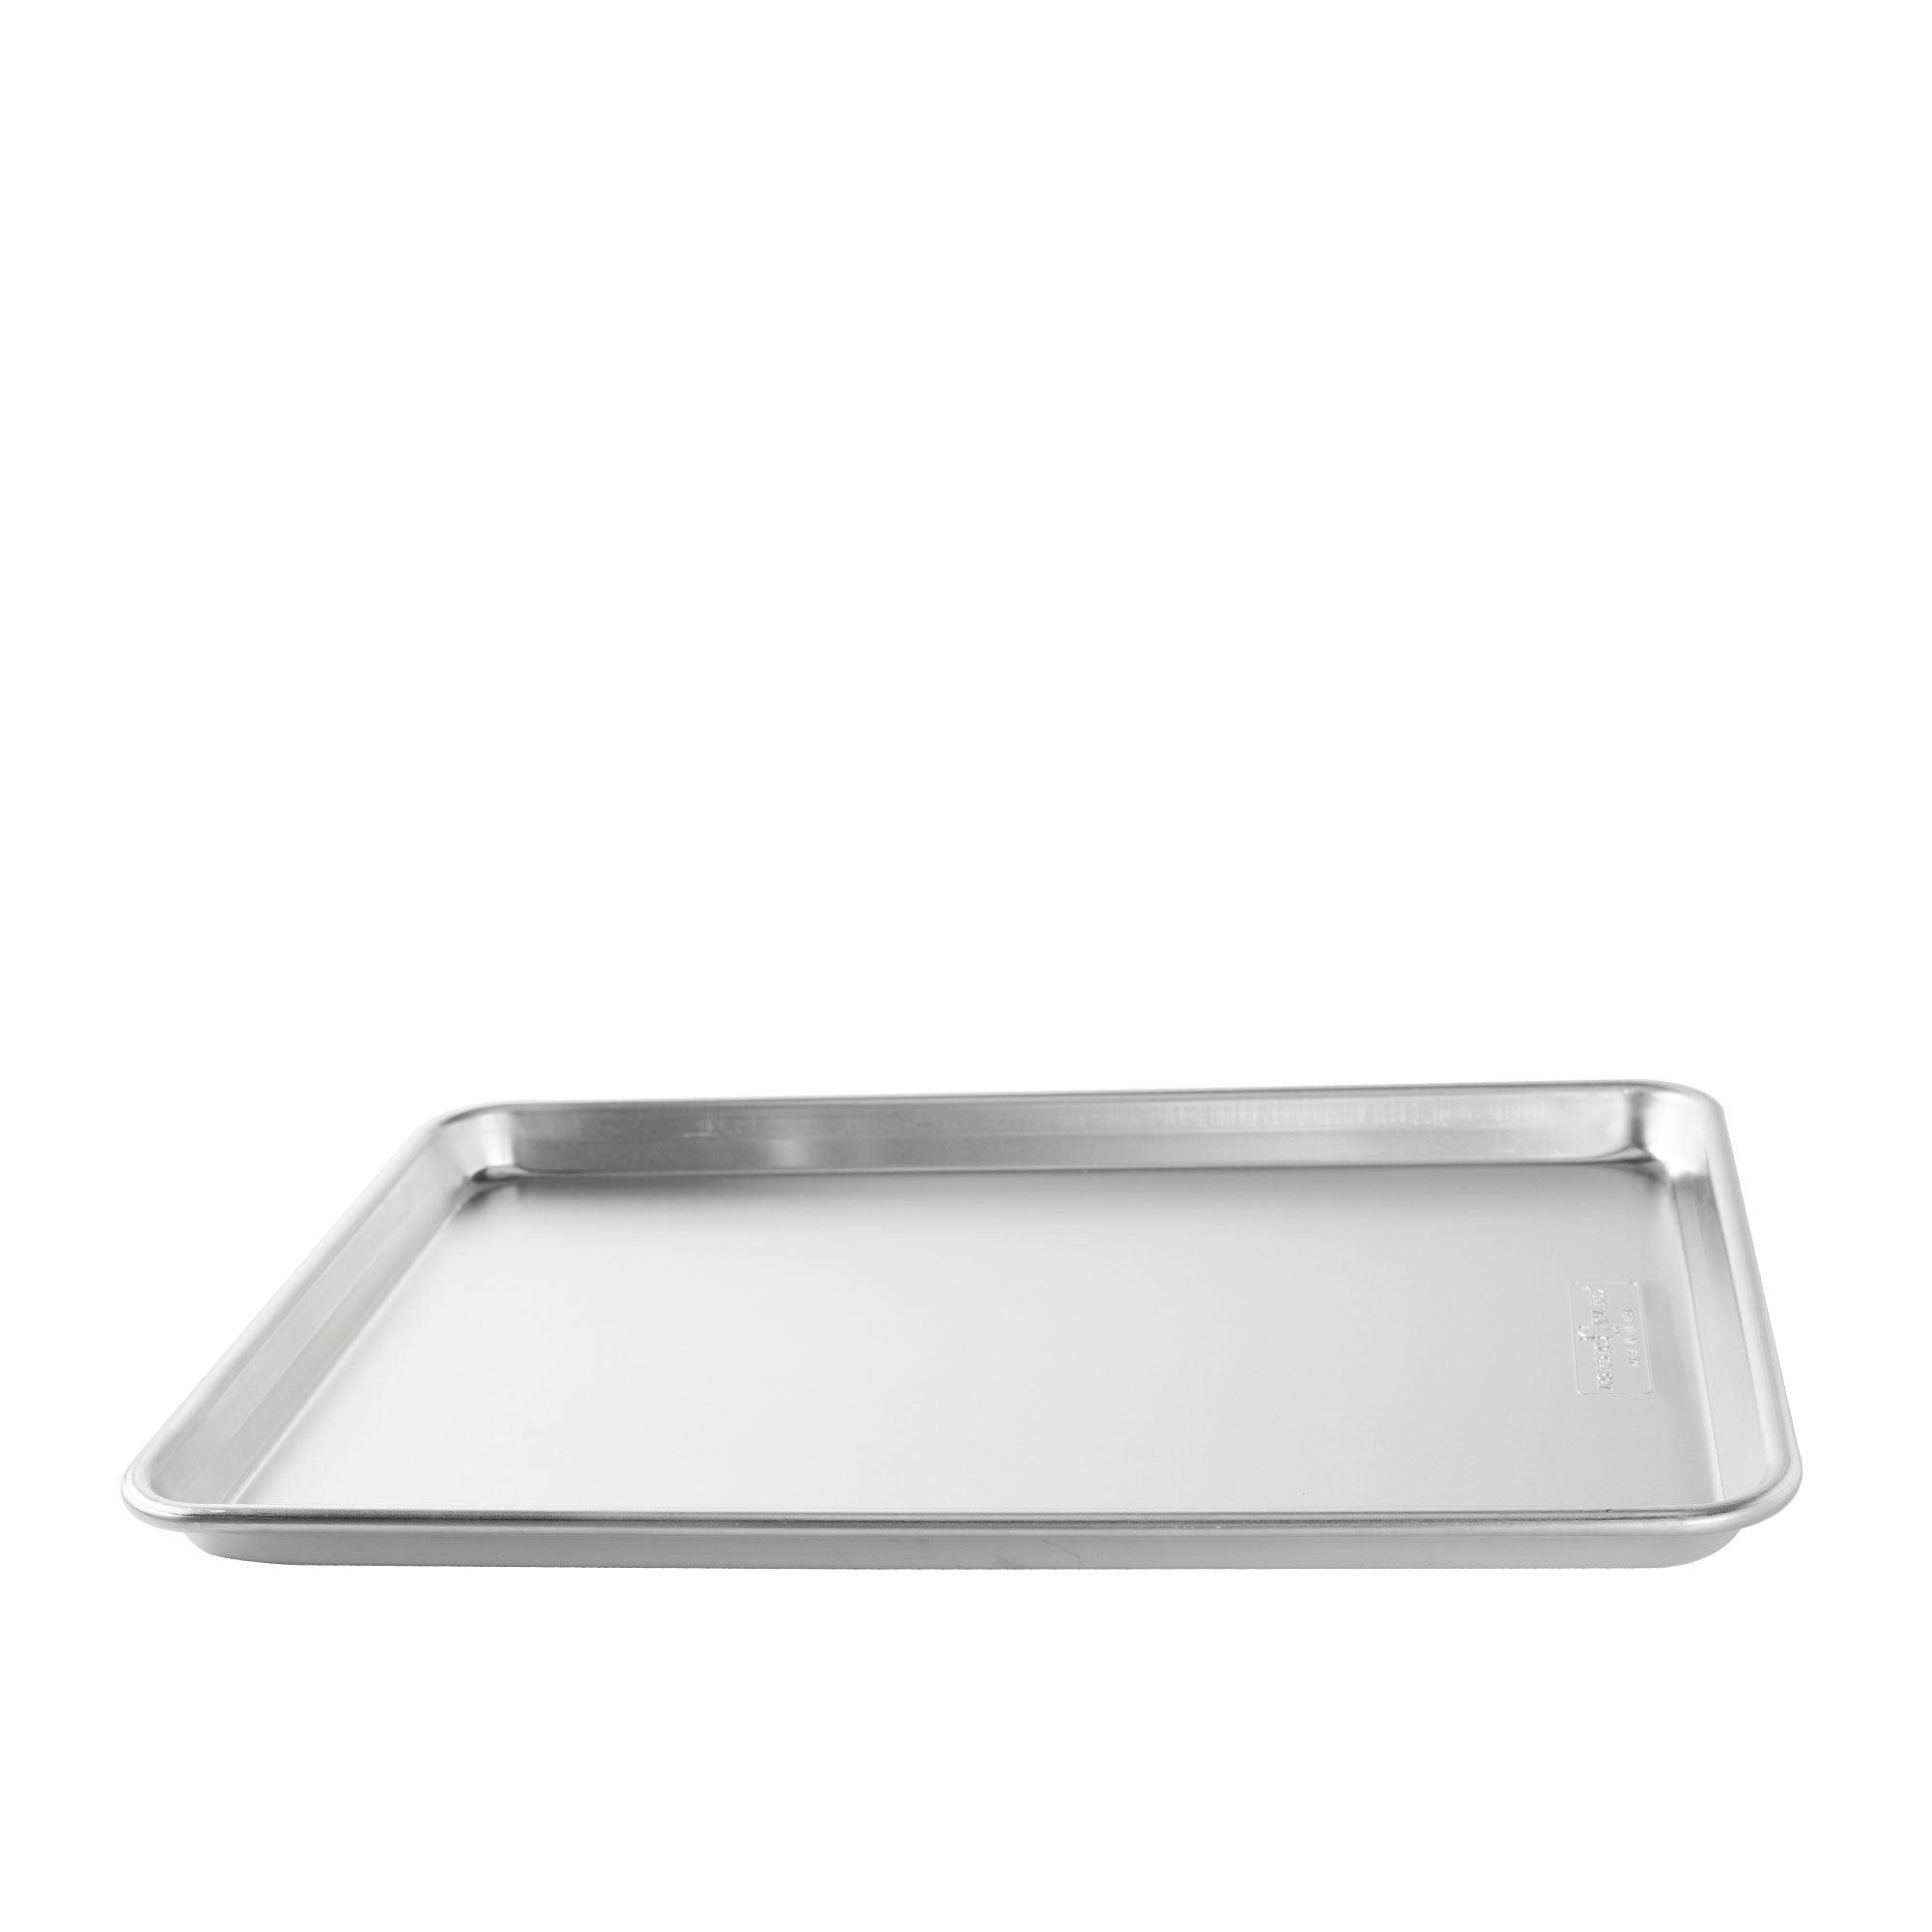 Nordic Ware Naturals Jelly Roll Baking Sheet 40cm Image 5